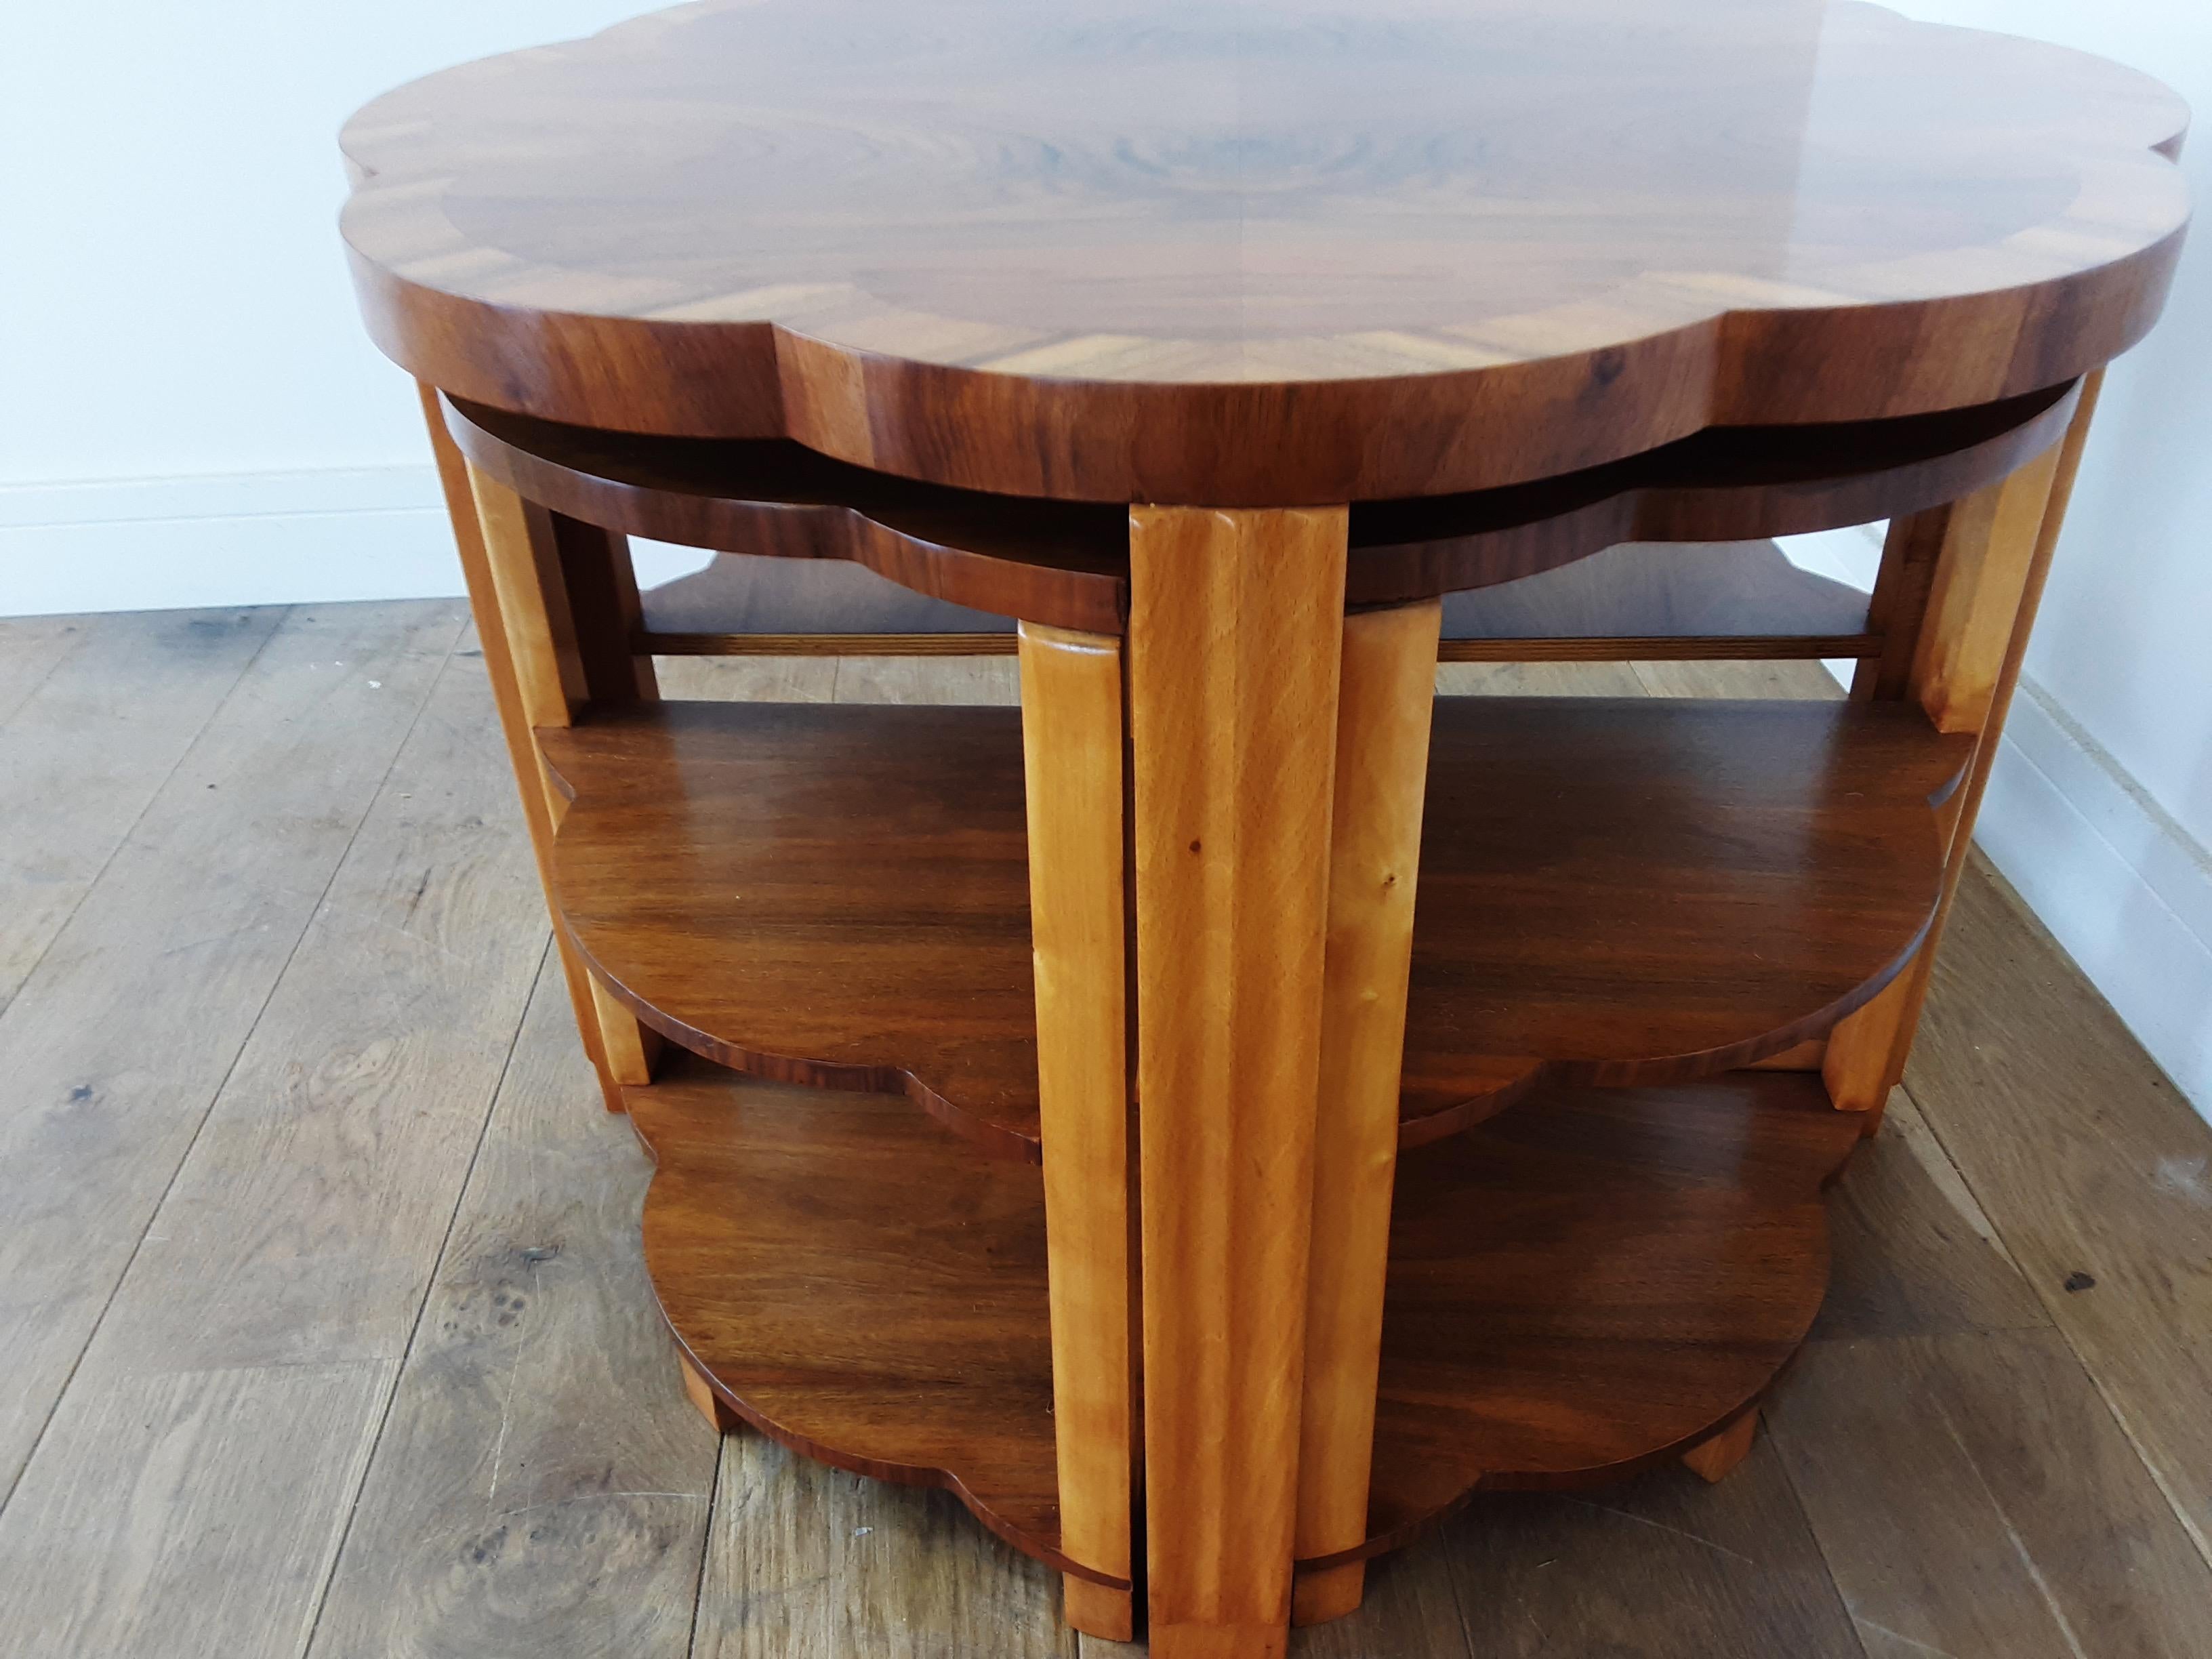 20th Century Art Deco Nest of Tables by Harry and Lou Epstein in a Brown Butterfly Walnut